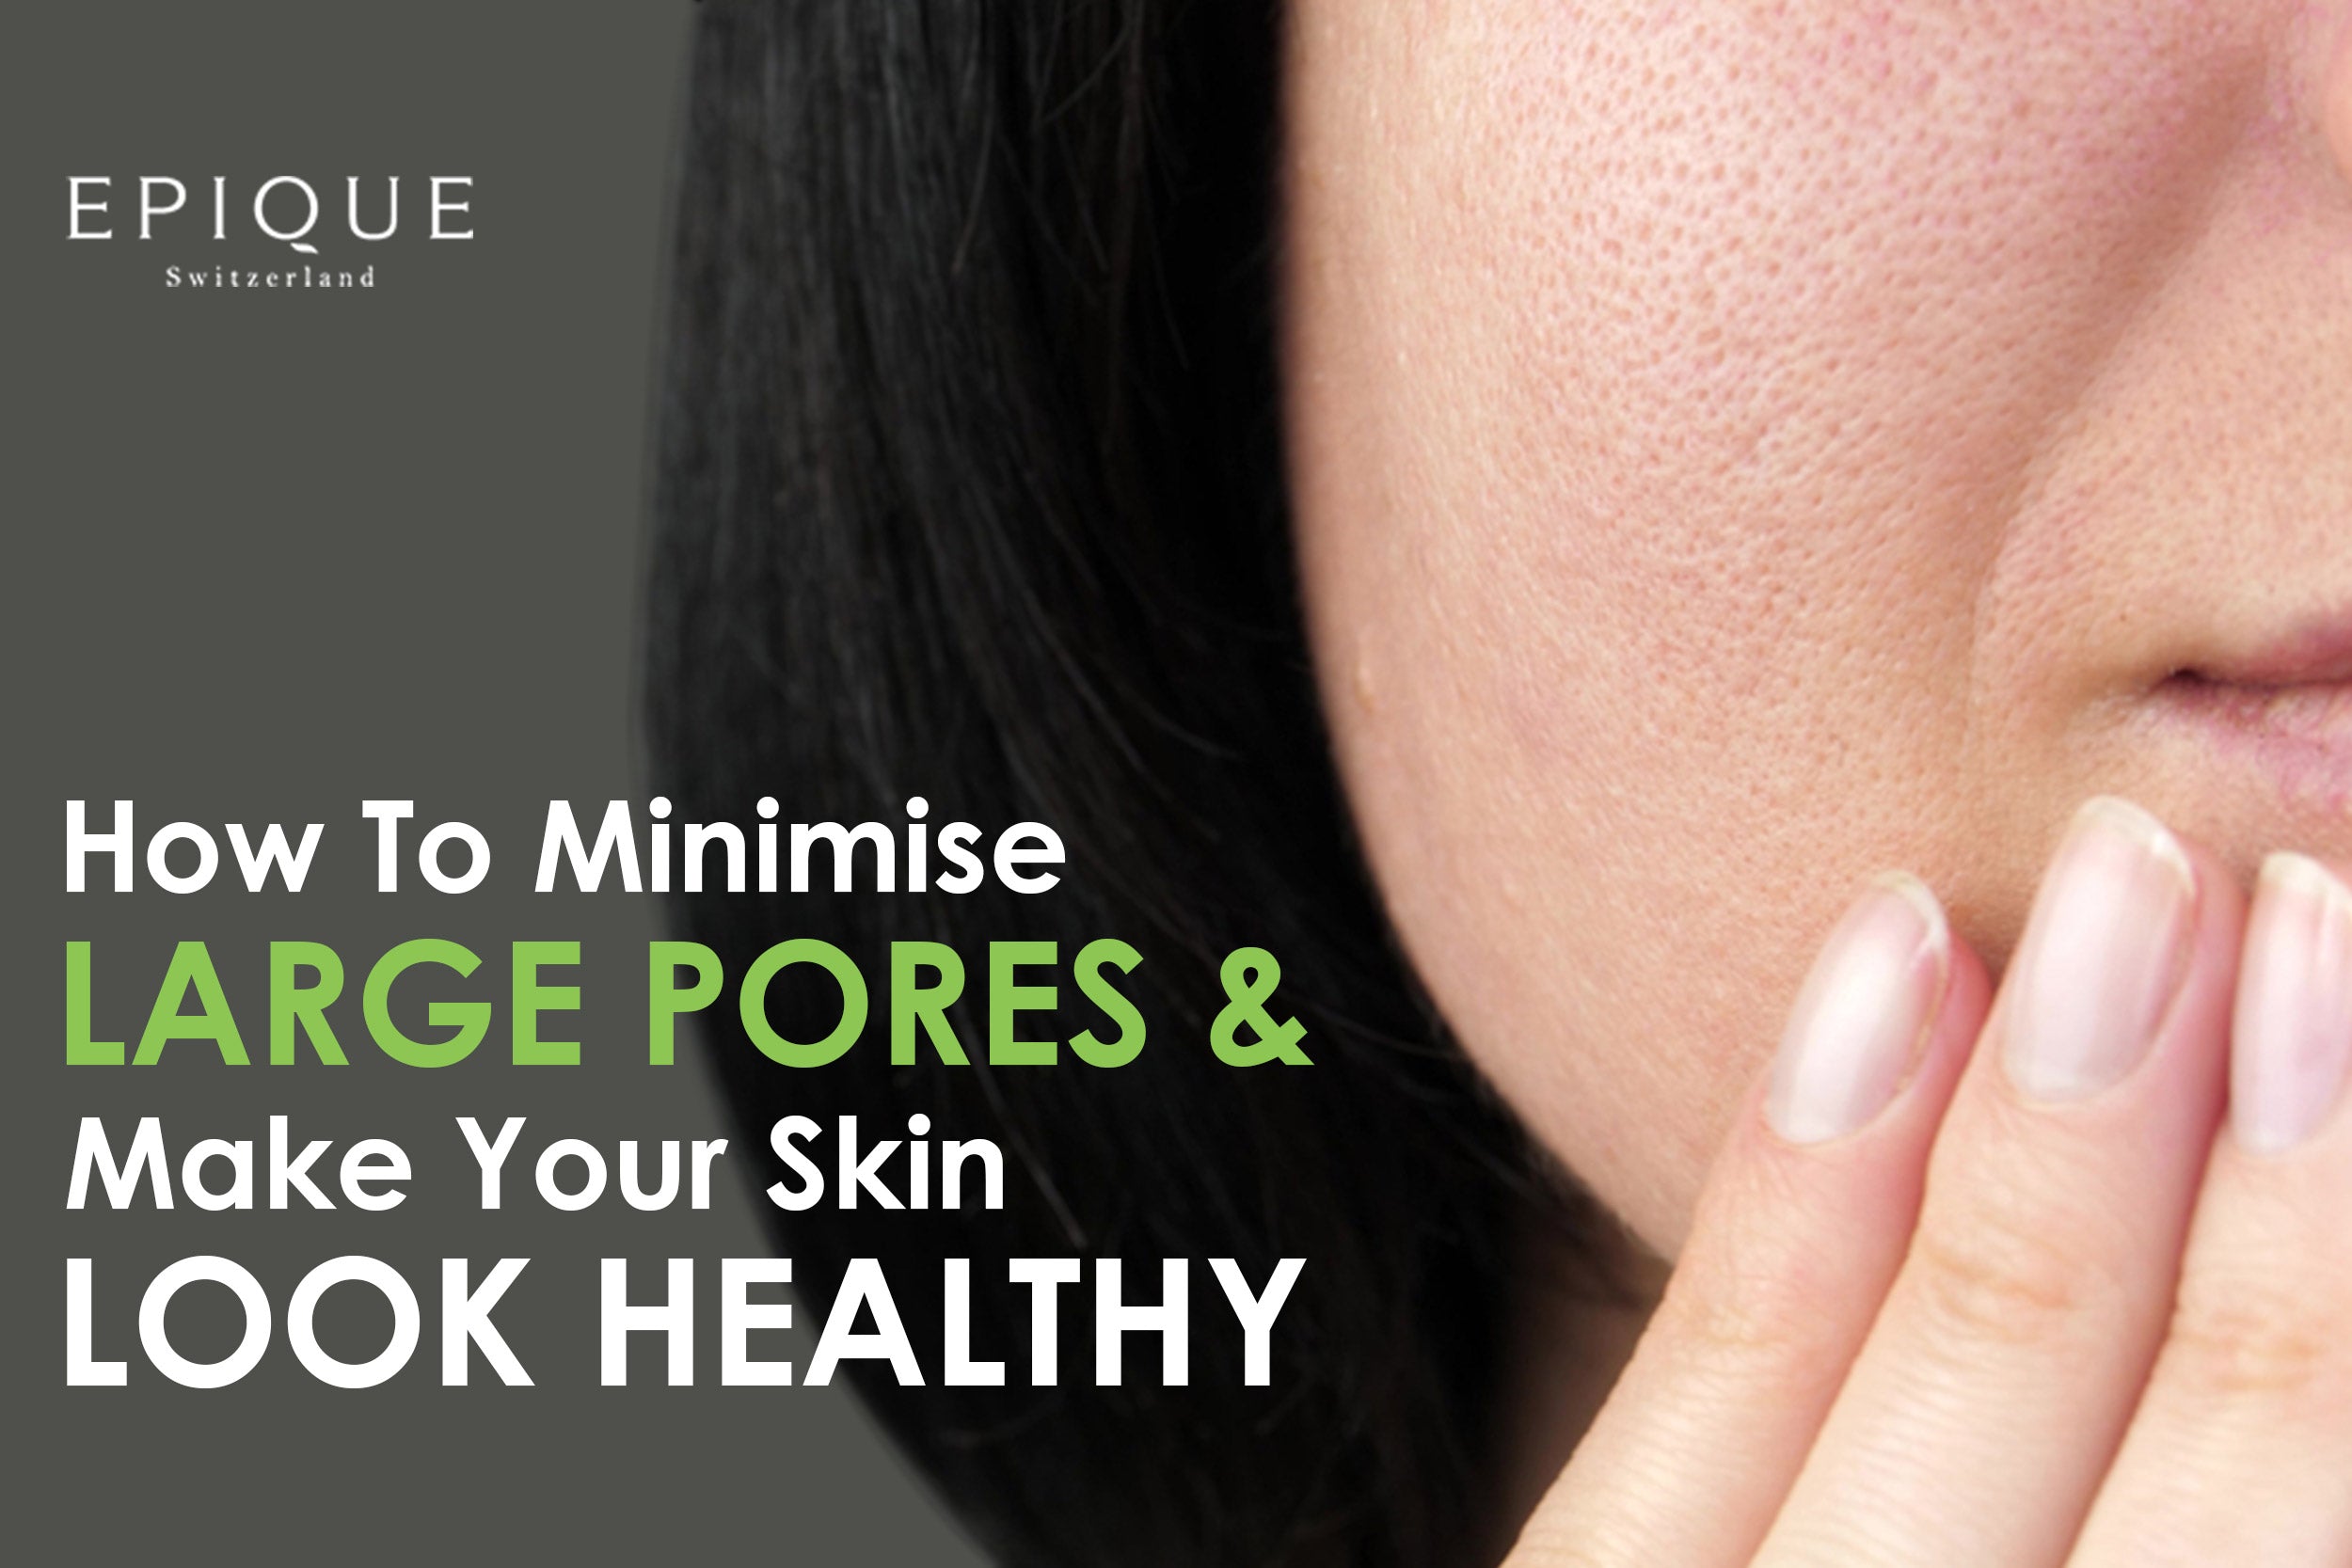 Here’s How to Minimise Large Pores and Make your Skin Look Healthy